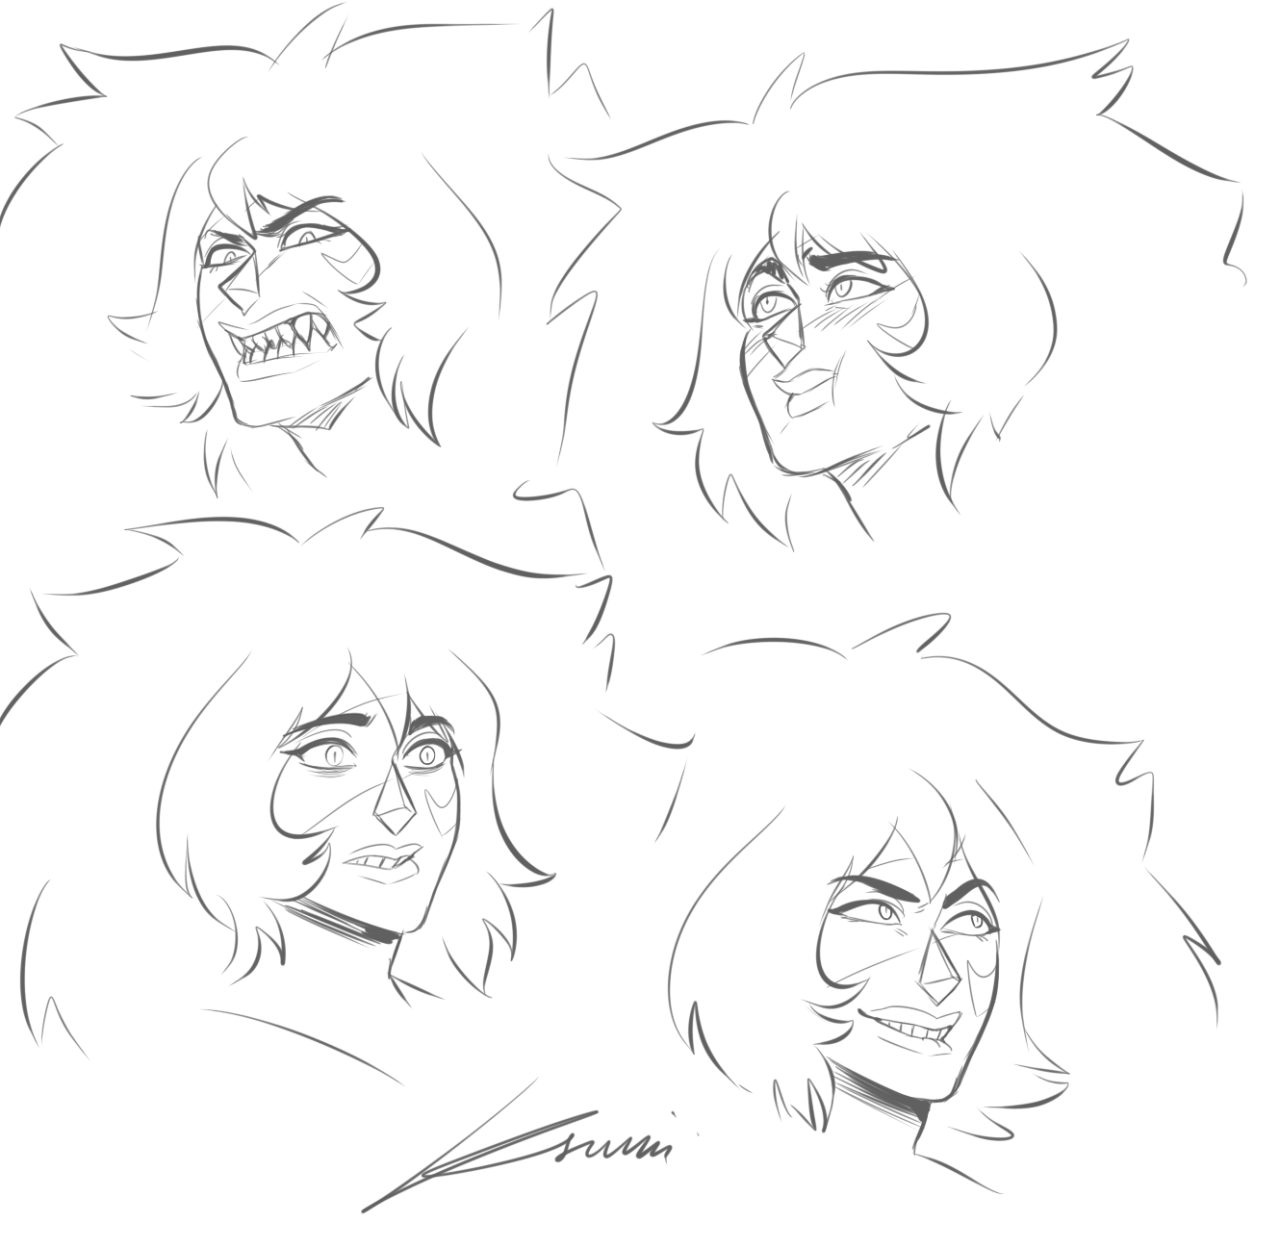 Some Jasper faces I did a while ago cauz I could clearly see that I cannot draw her